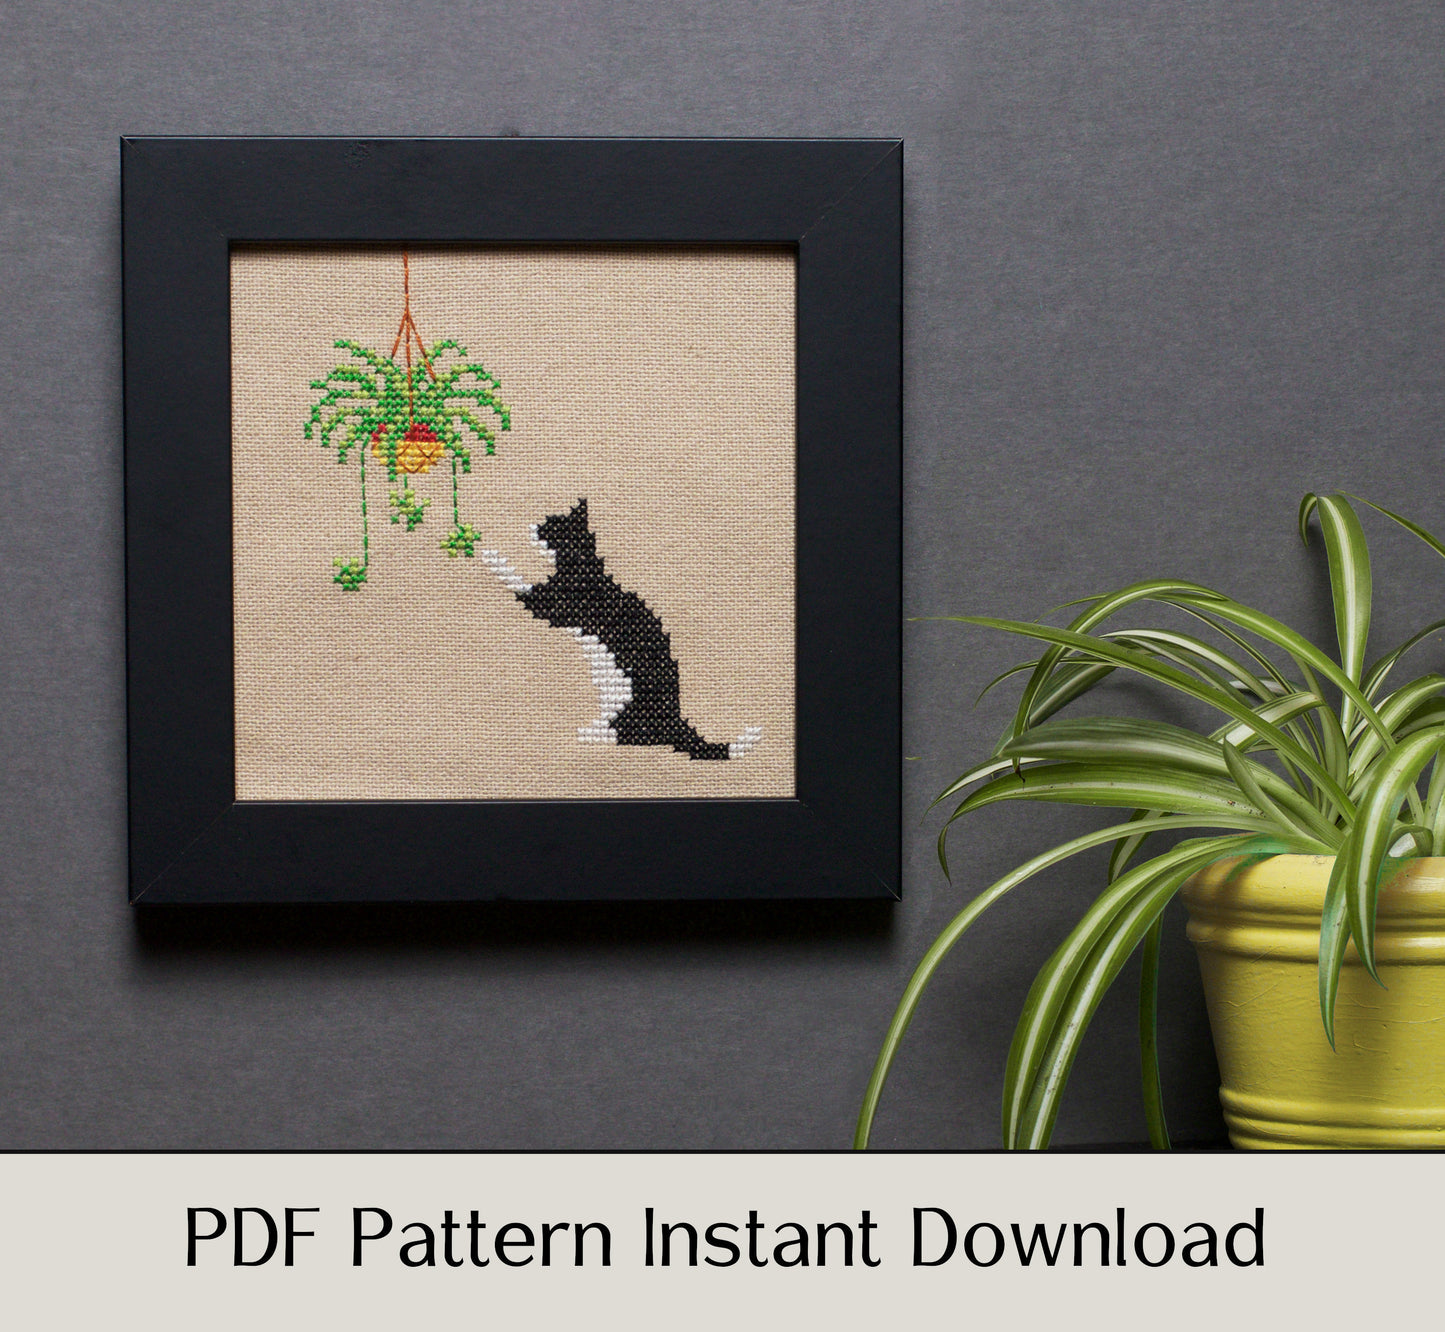 How To Cross Stitch, With 29 Free Beginner's Patterns